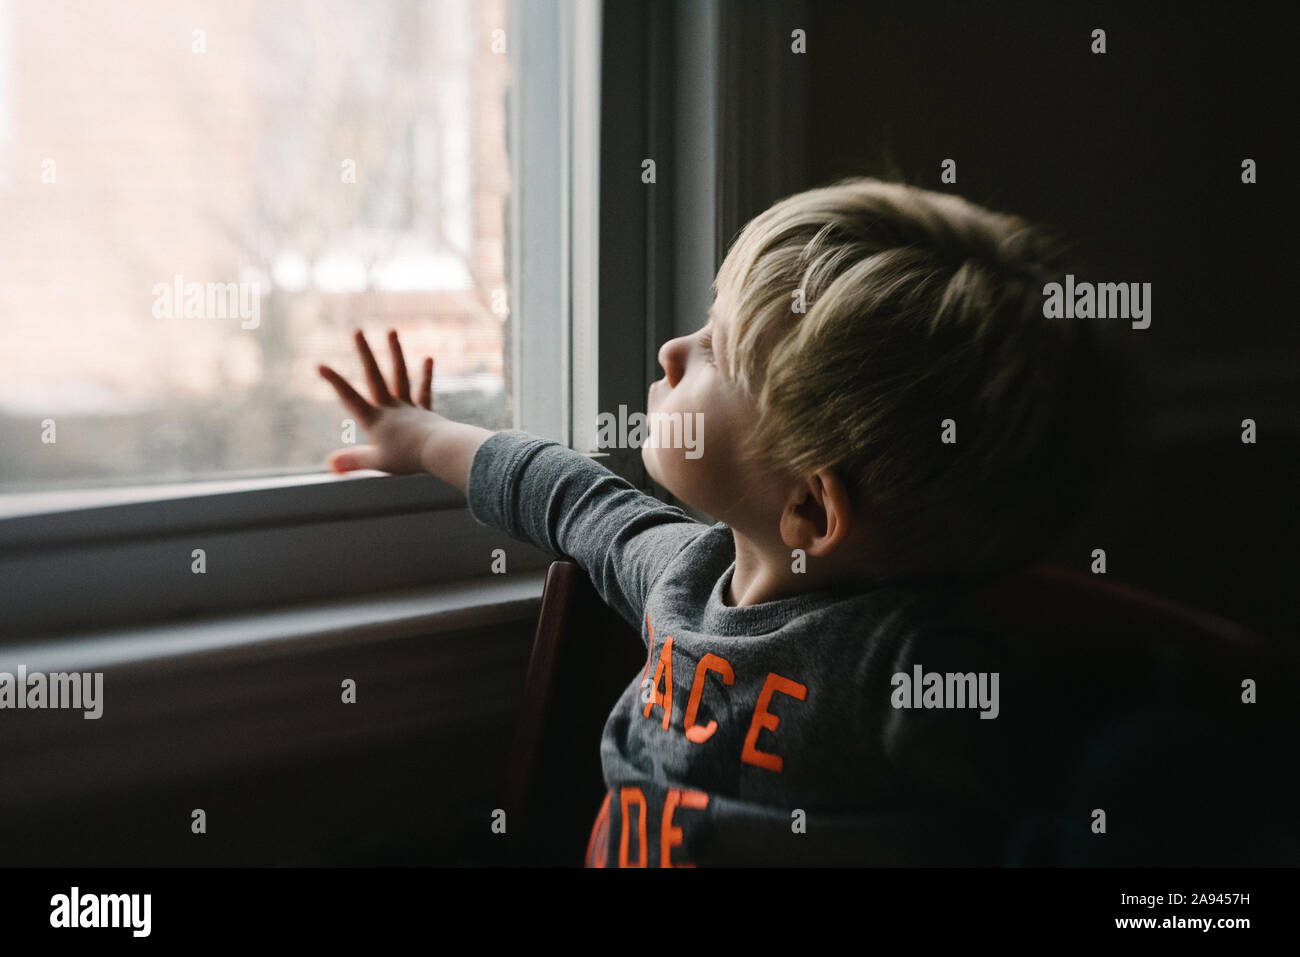 A toddler boy looks out of a window. Stock Photo